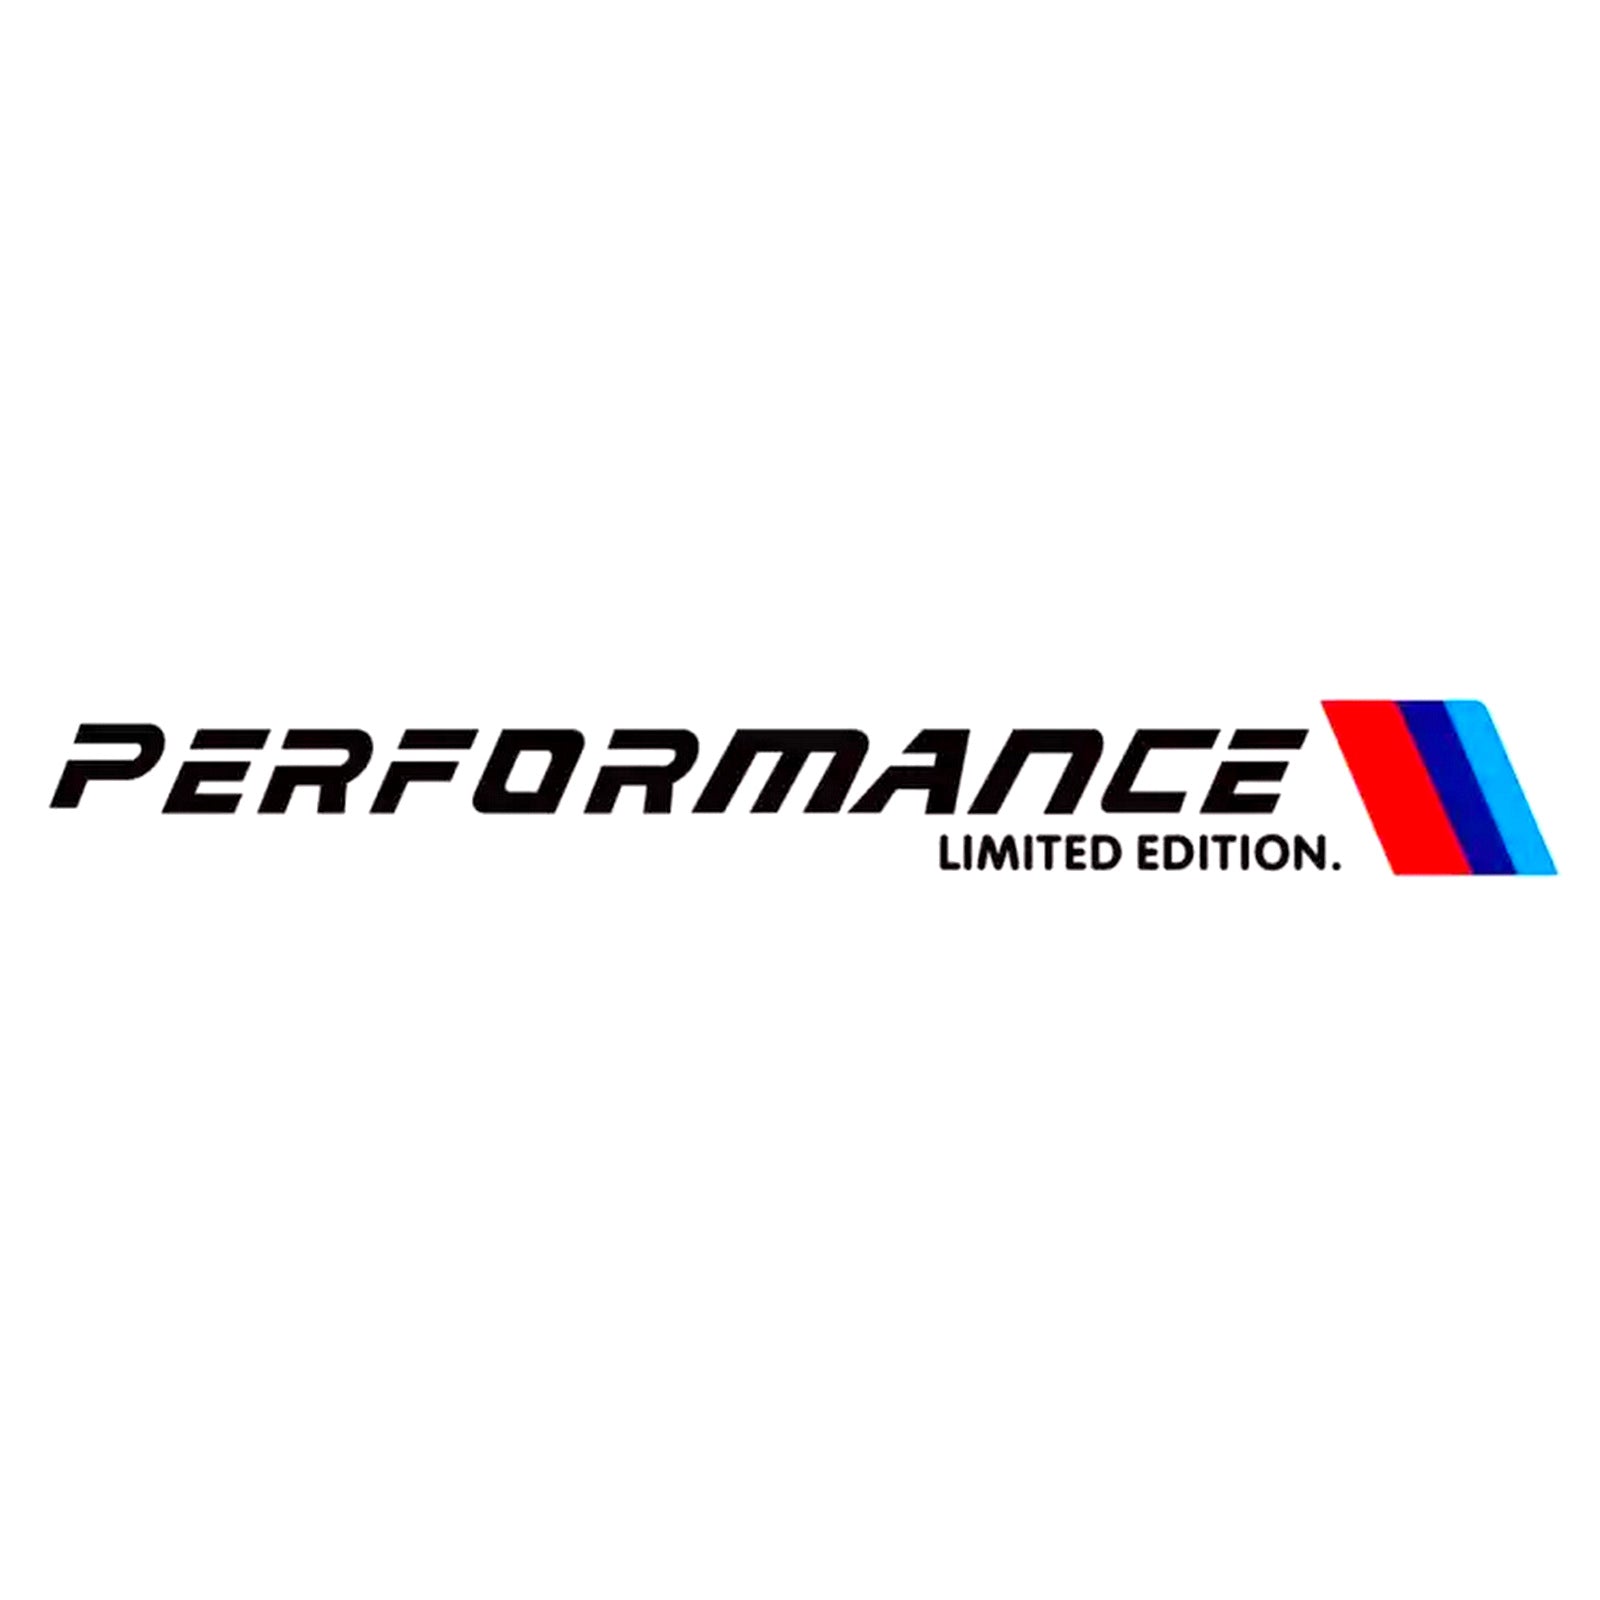 STICKER, PERFORMANCE LIMITED EDITION